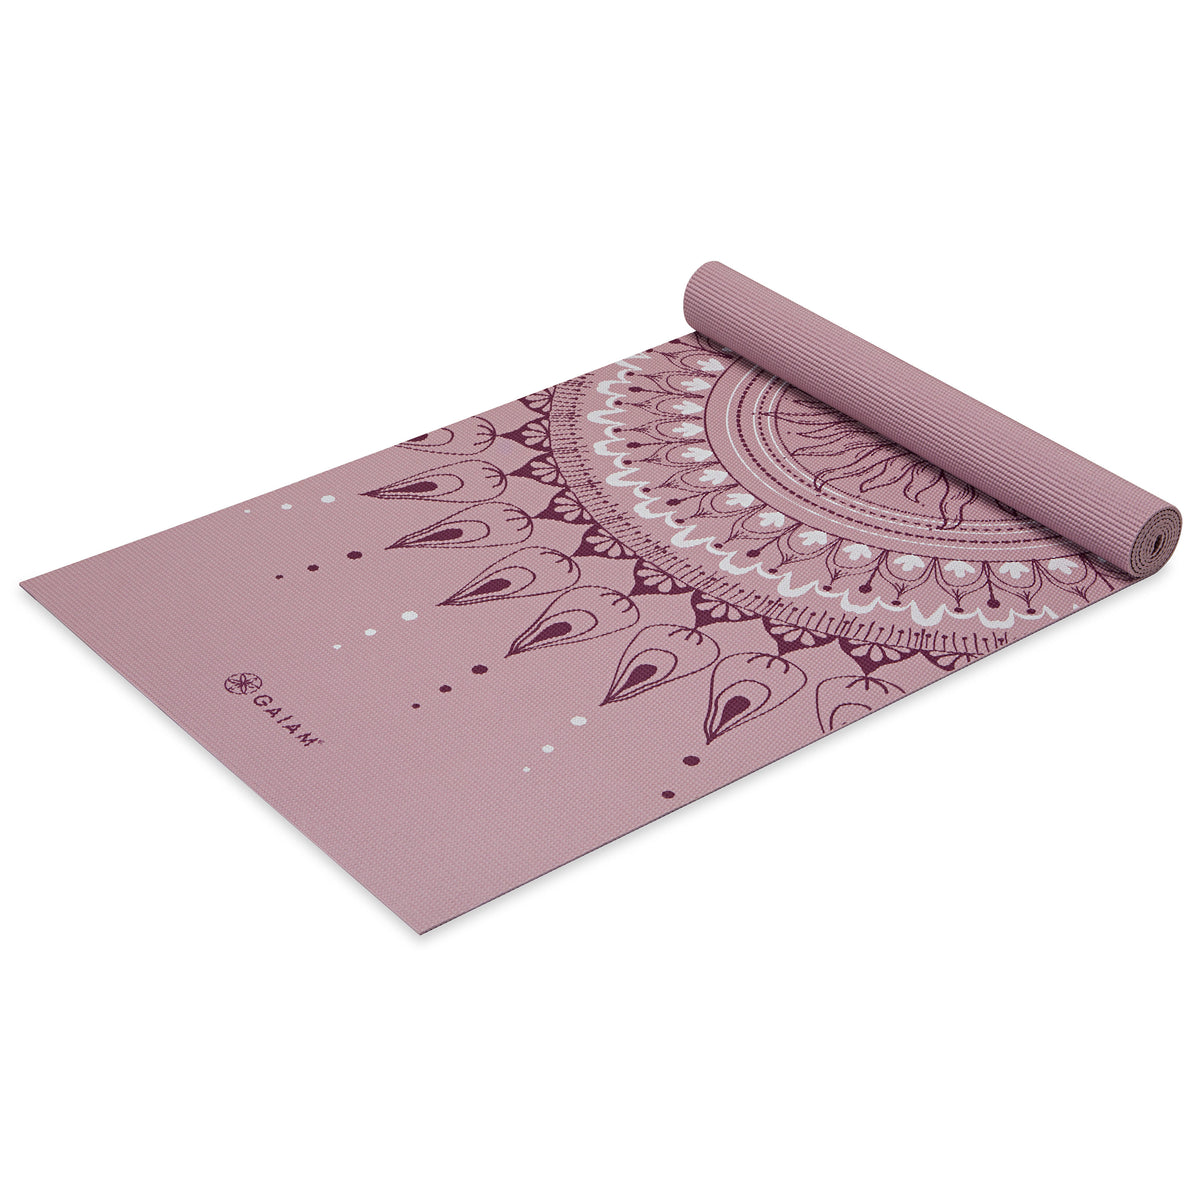 Gaiam Here & Now Yoga Mat (4mm) Dusty Rose top rolled angle